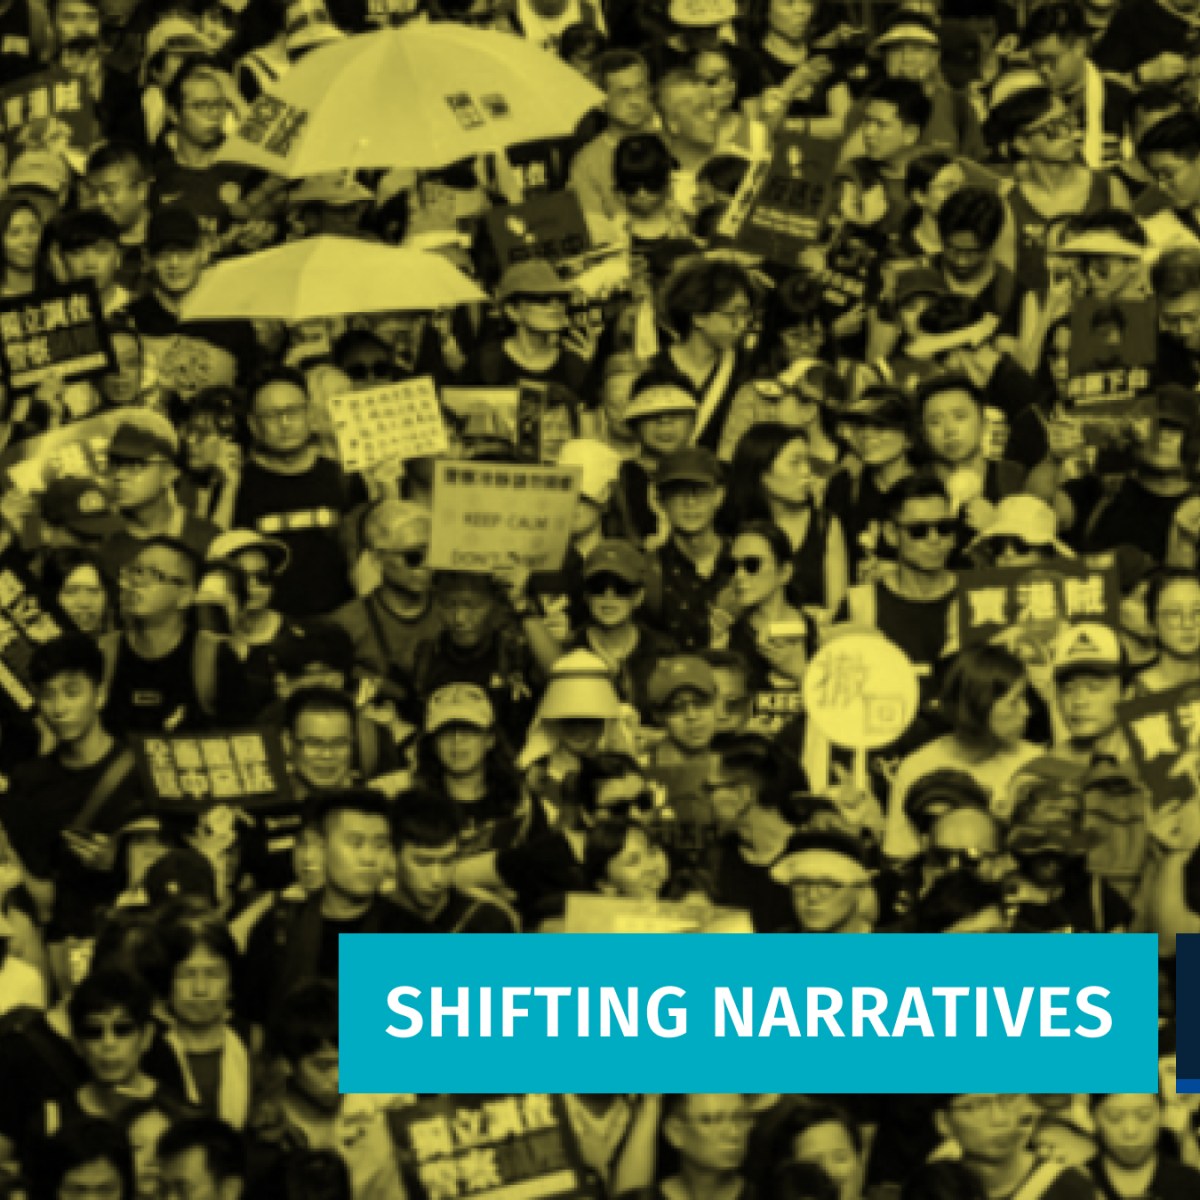 Shifting narratives: How the Hong Kong gov’t attitude to July 1 protest organiser soured over the years